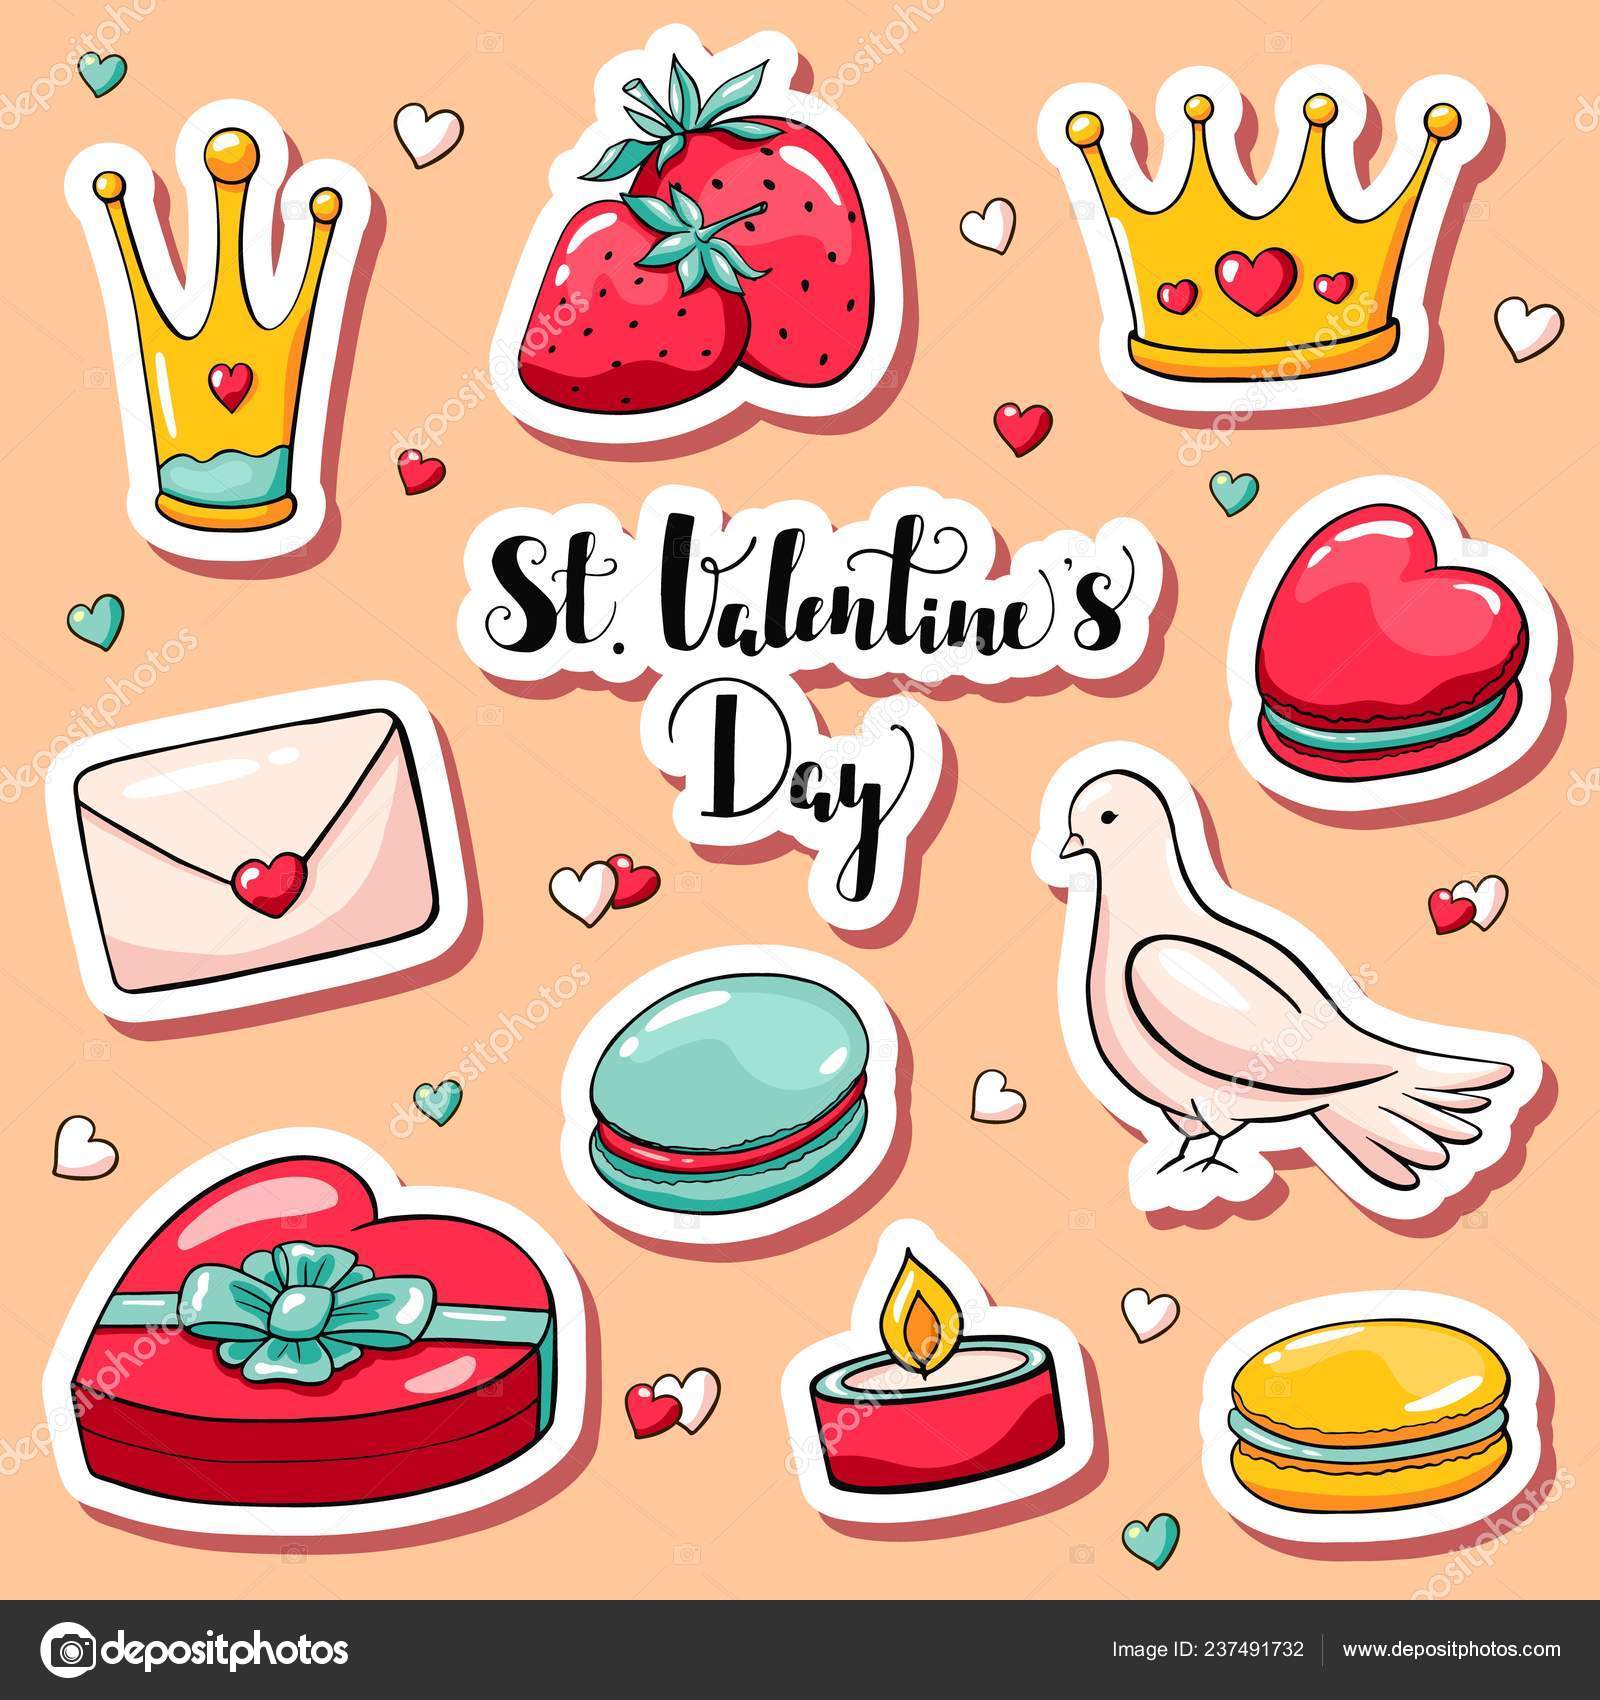 Cute Valentine's day stickers in doodle style. 